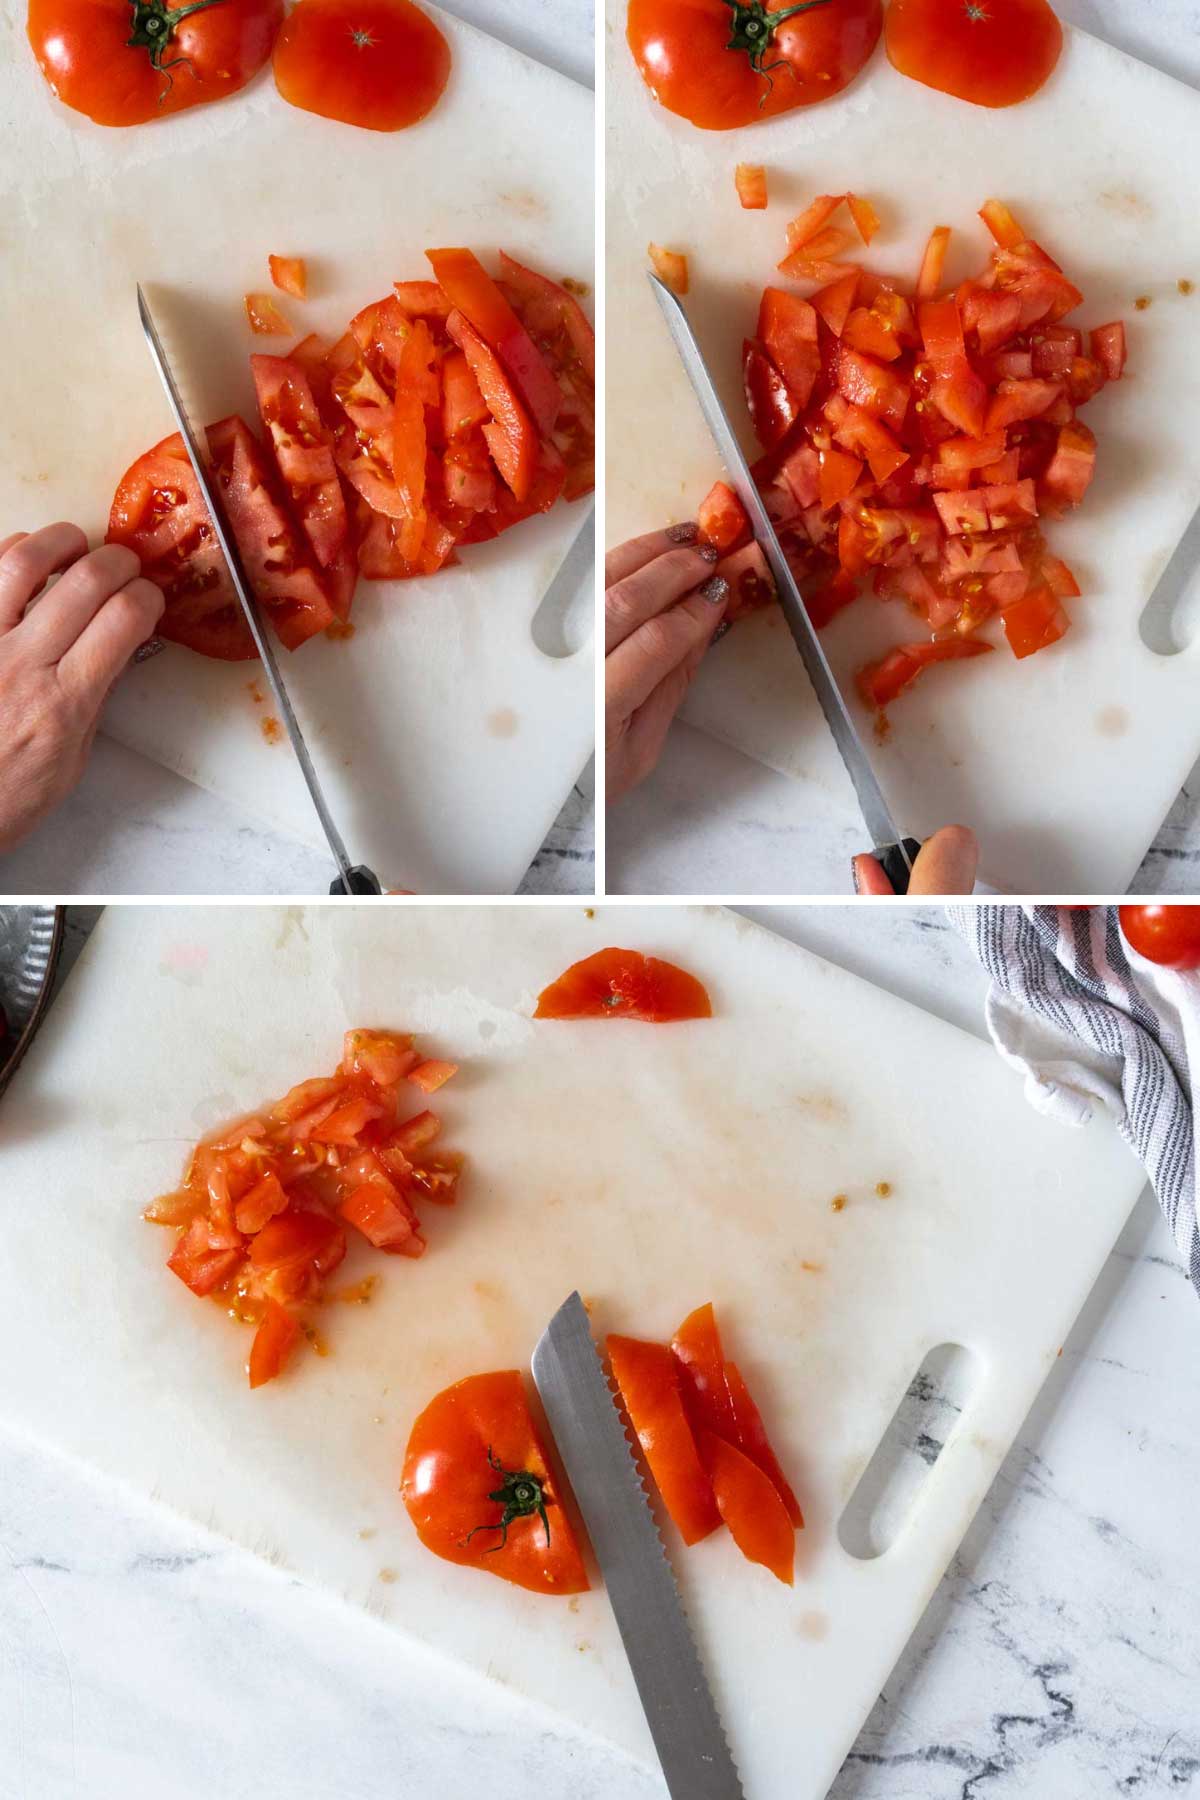 Dicing a large tomato.